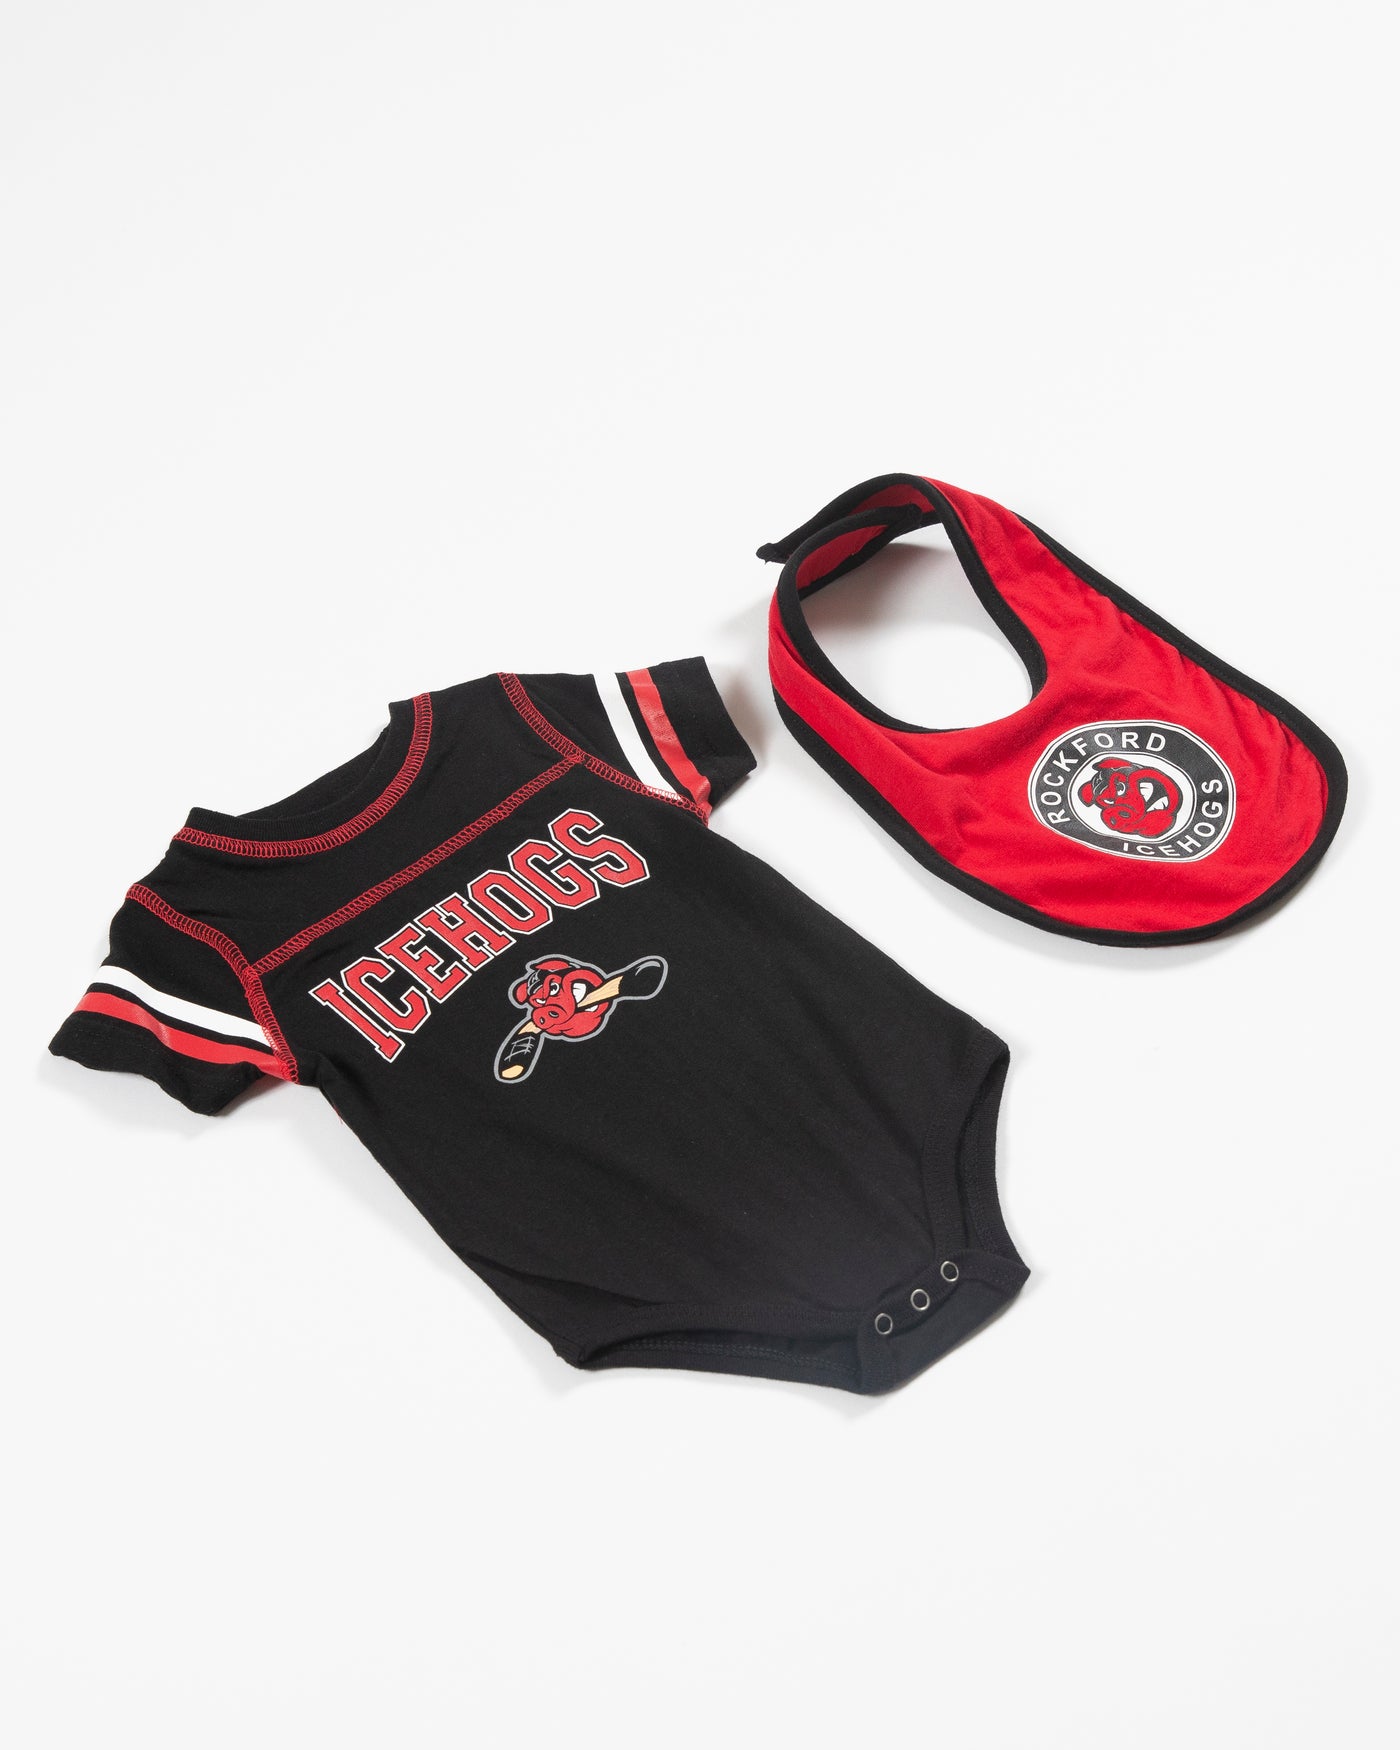 black and red Rockford IceHogs onesie and bib set - angled lay flat